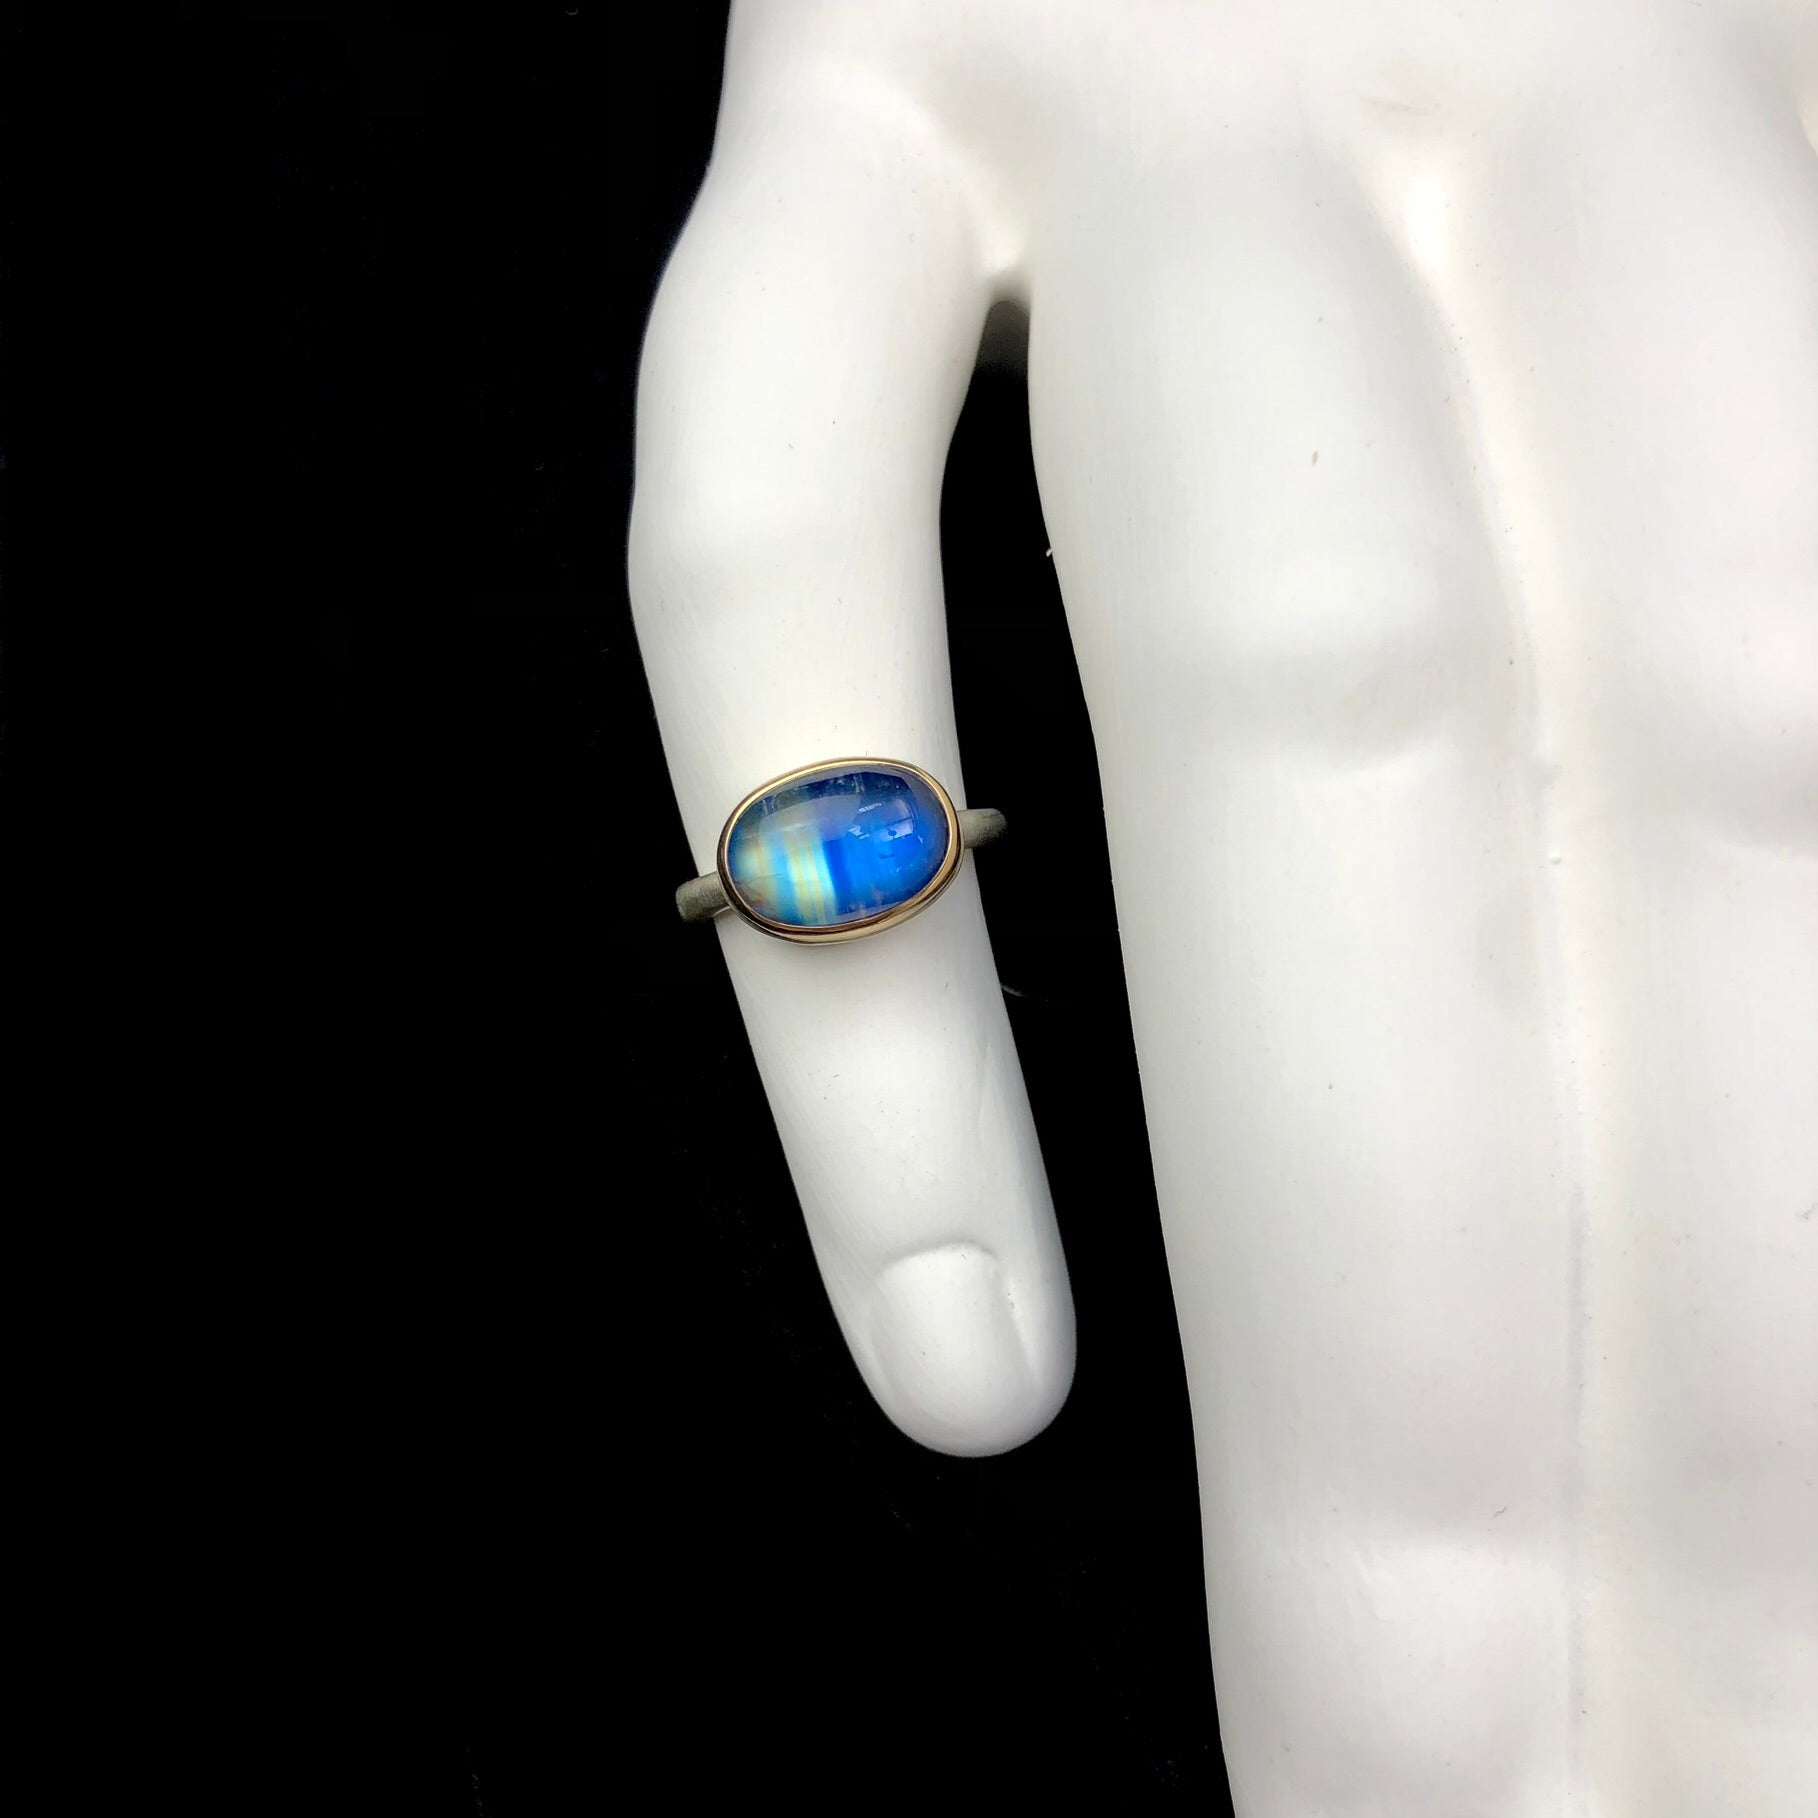 Top view of Oval Rianbow Moonstone Ring shown on white ceramic finger